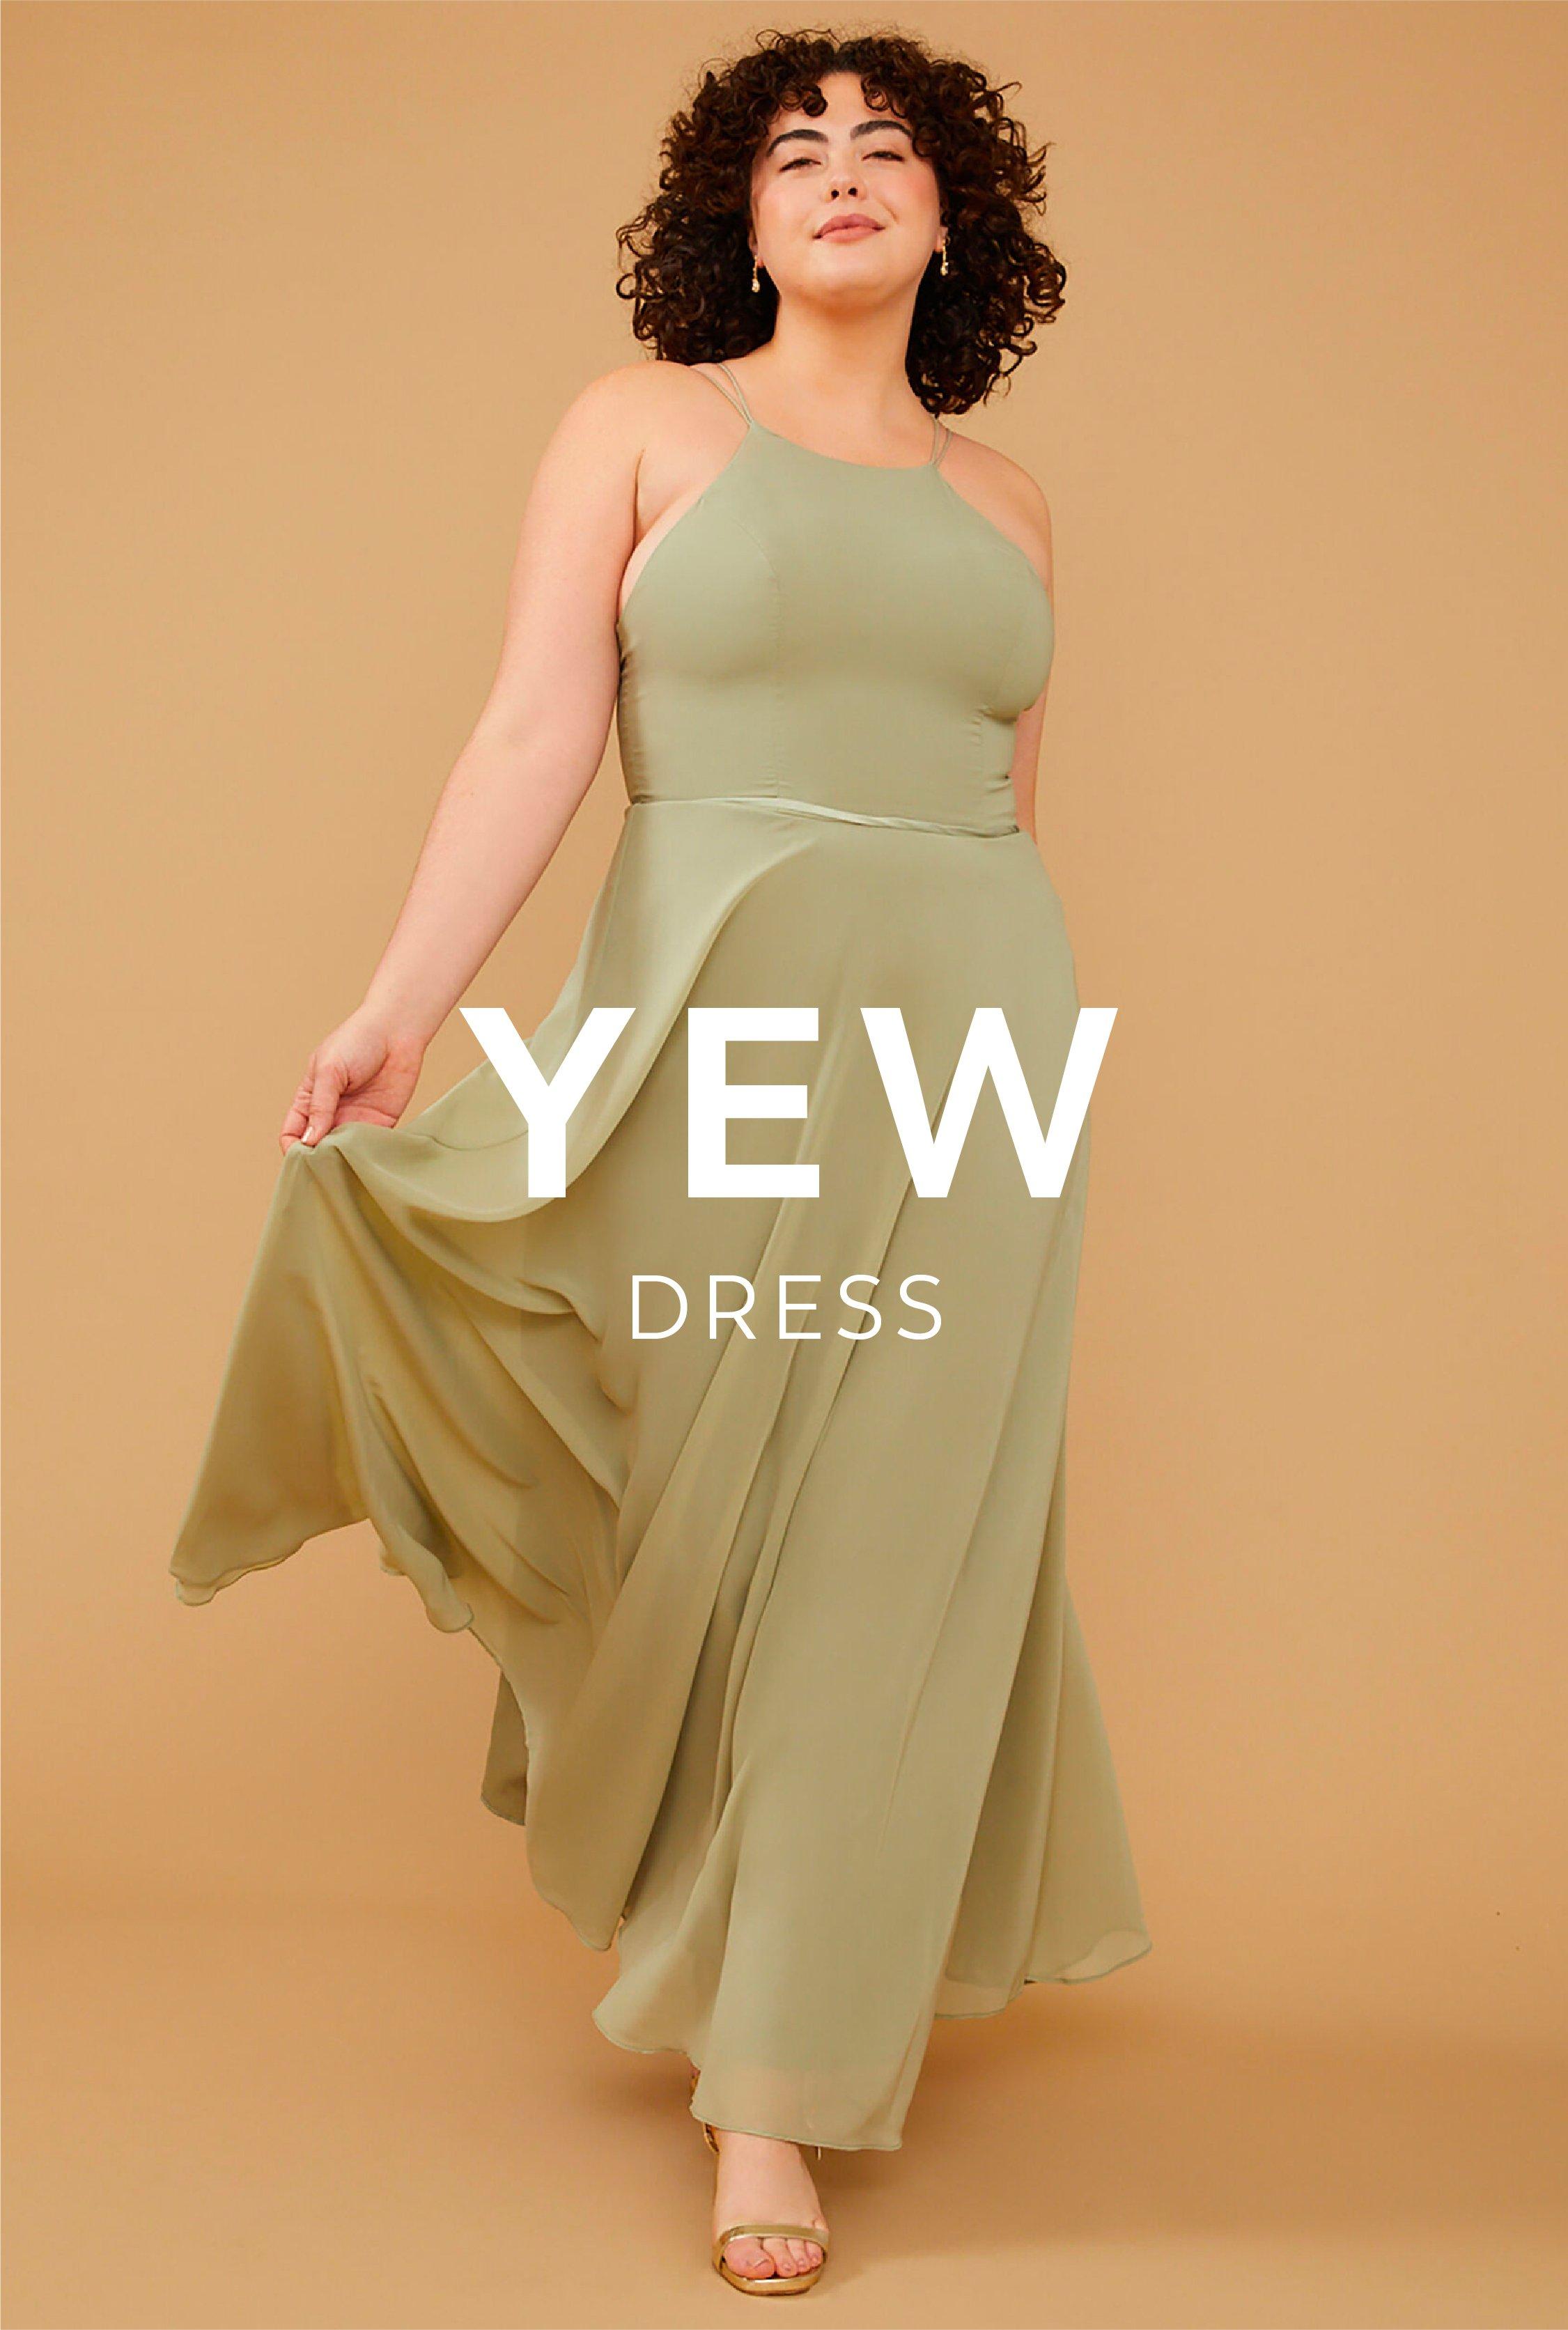 Vow'd Weddings Yew Dress in Sage Green